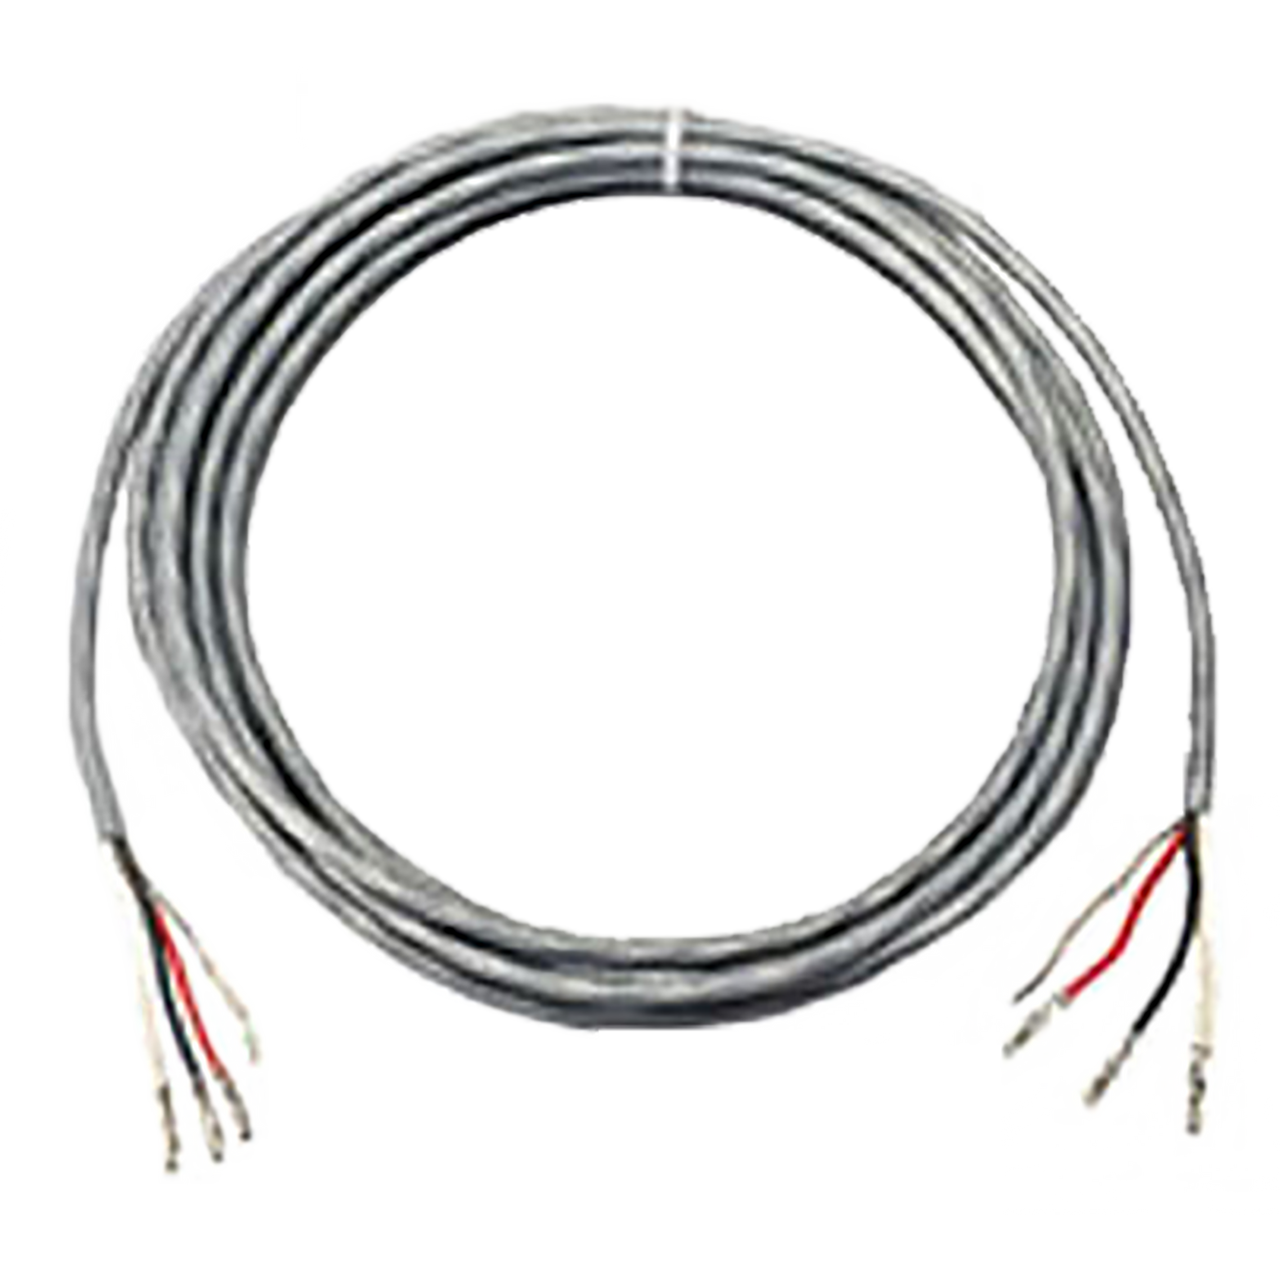 Code-3 - KABLE - 1 15, 20', or 25' Hide-a-Way strobe cable